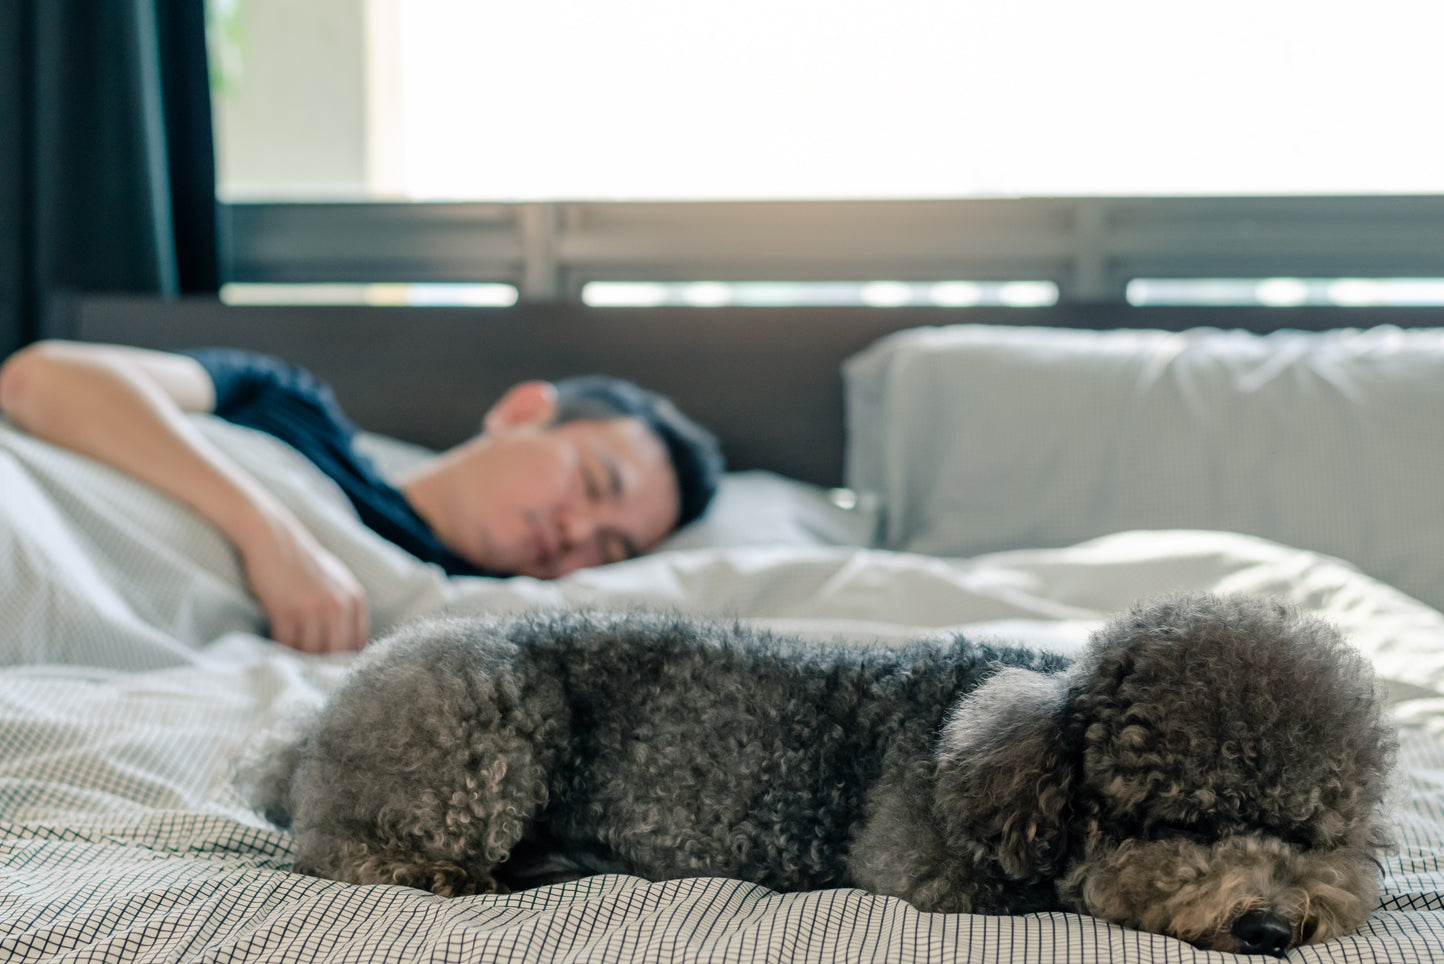 black poodle dog sleeping at foot of bed with man in background sleeping